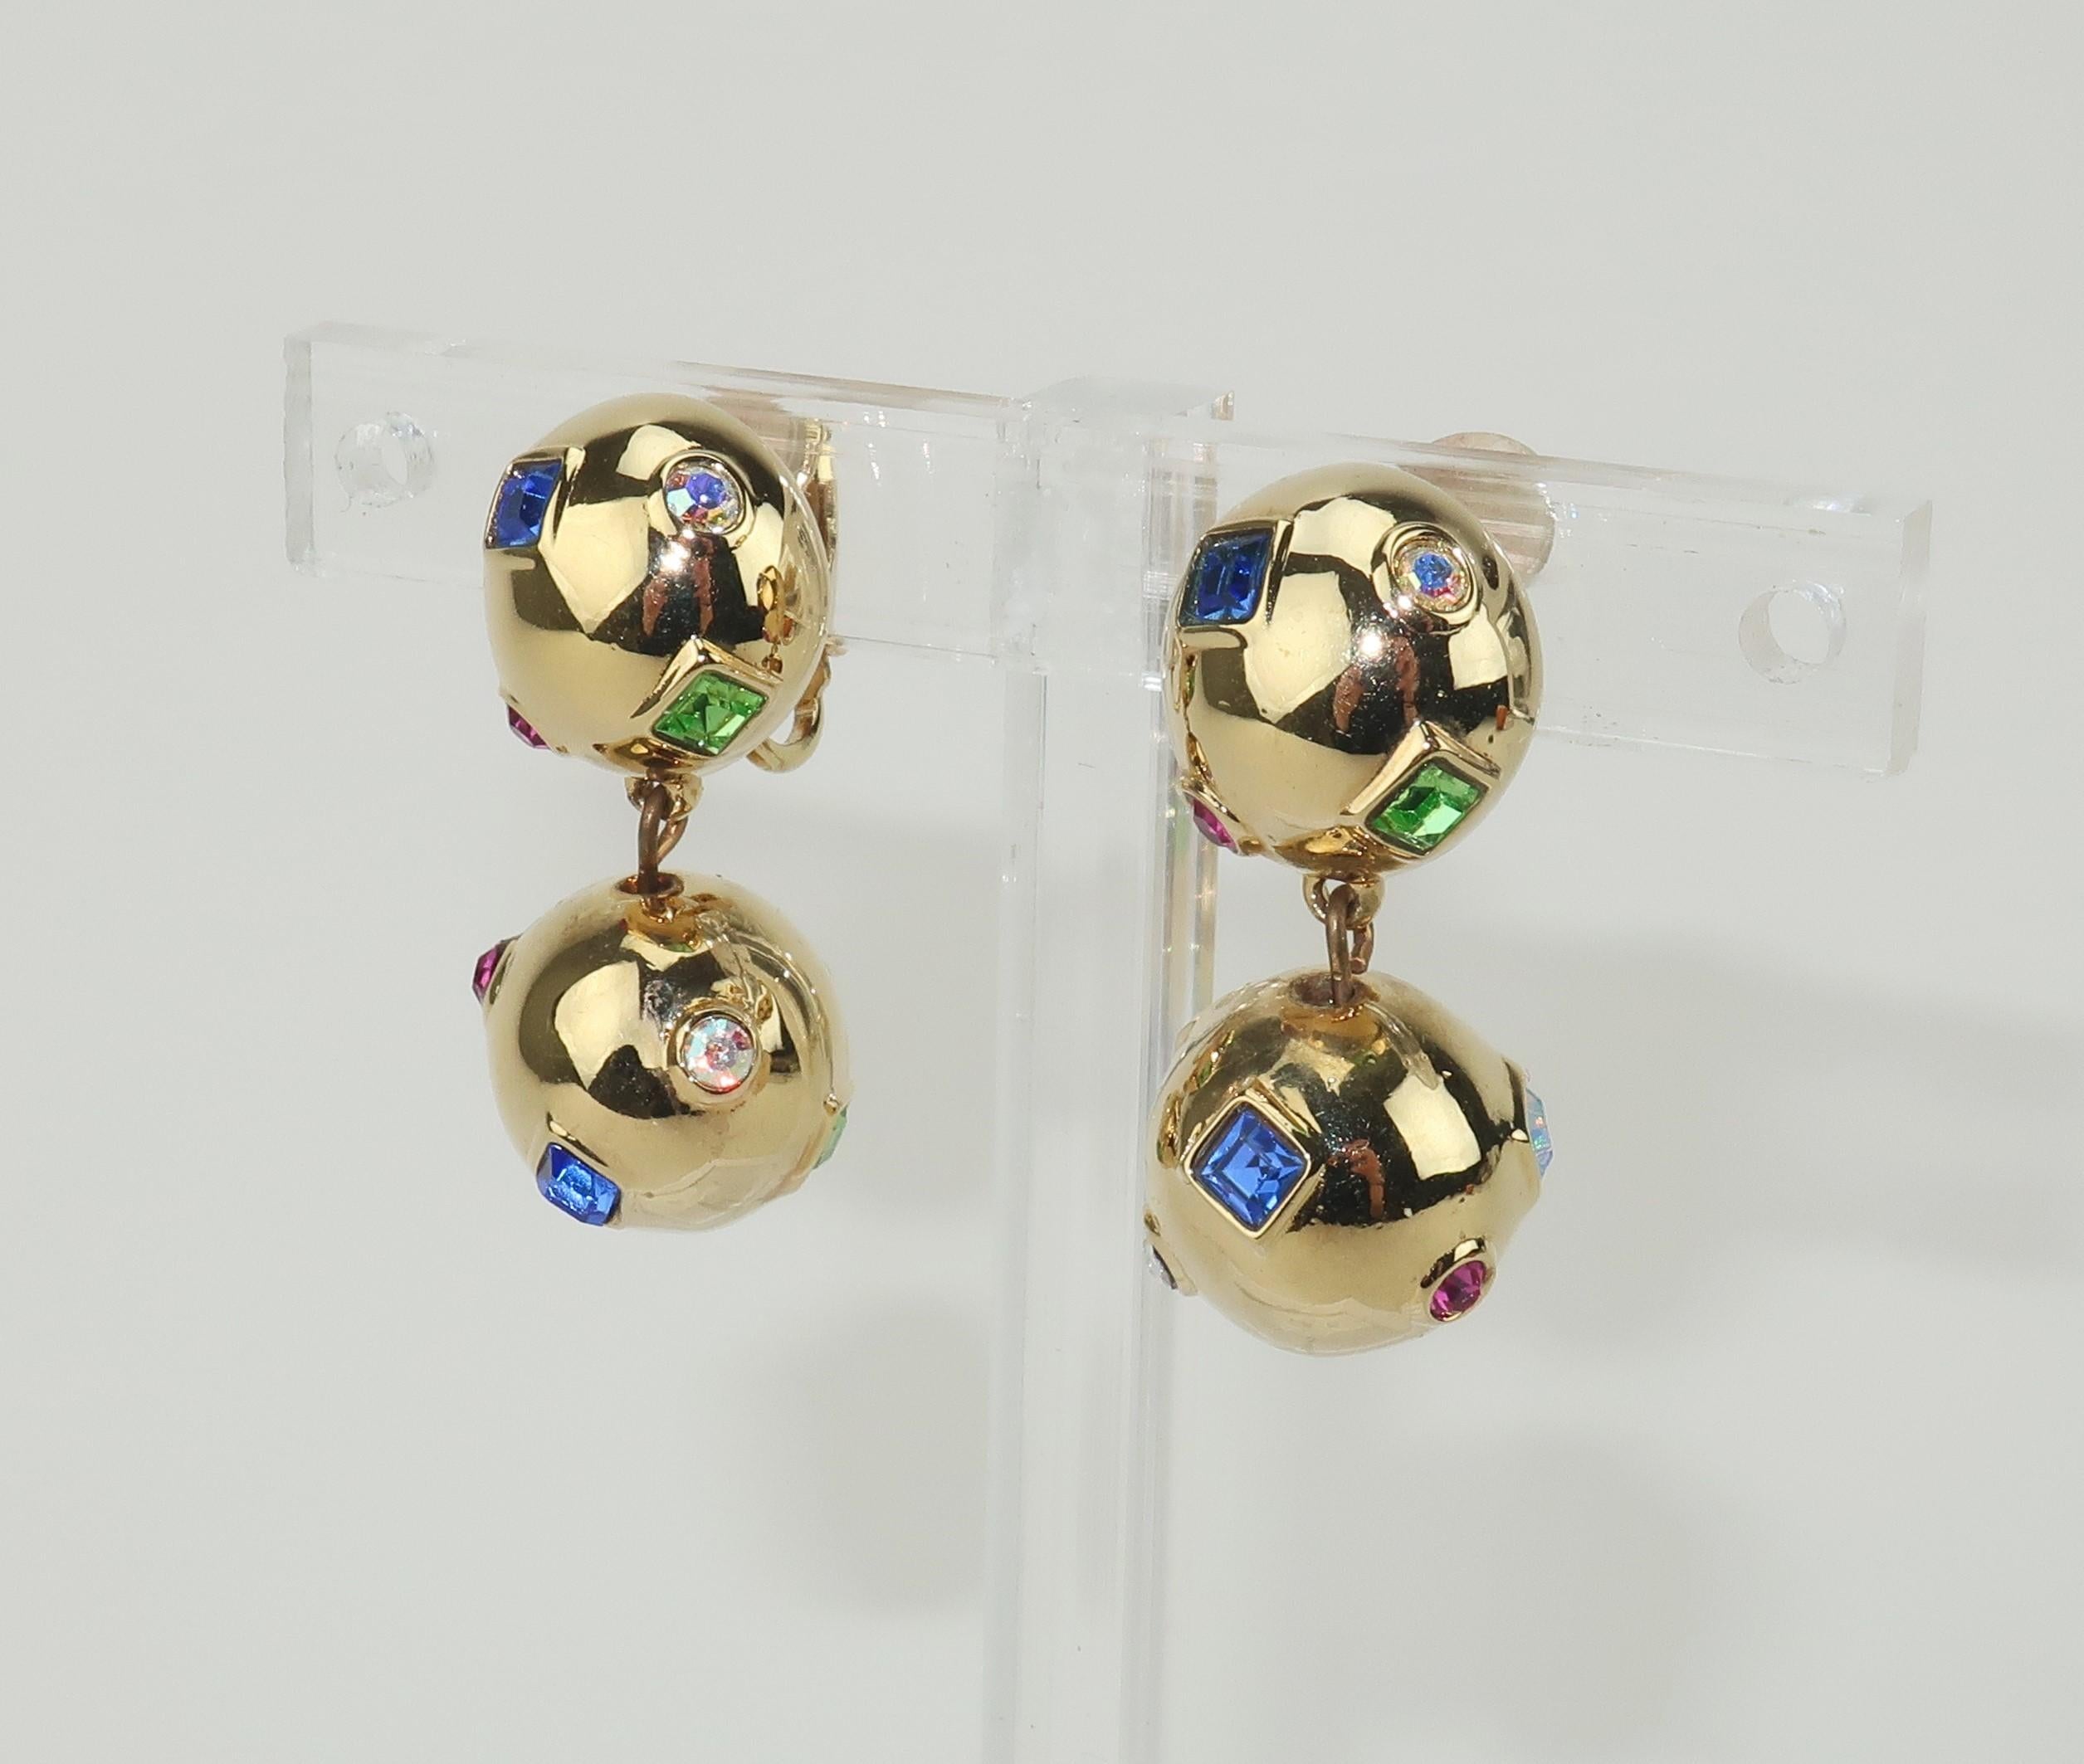 A beautiful pair of gold tone dangle orb earrings embellished with Swarovski sparkling crystal rhinestones in multi color shades of ruby red, sapphire blue, peridot green and iridescent pink.  Outfitted with clip on hardware and signed with the